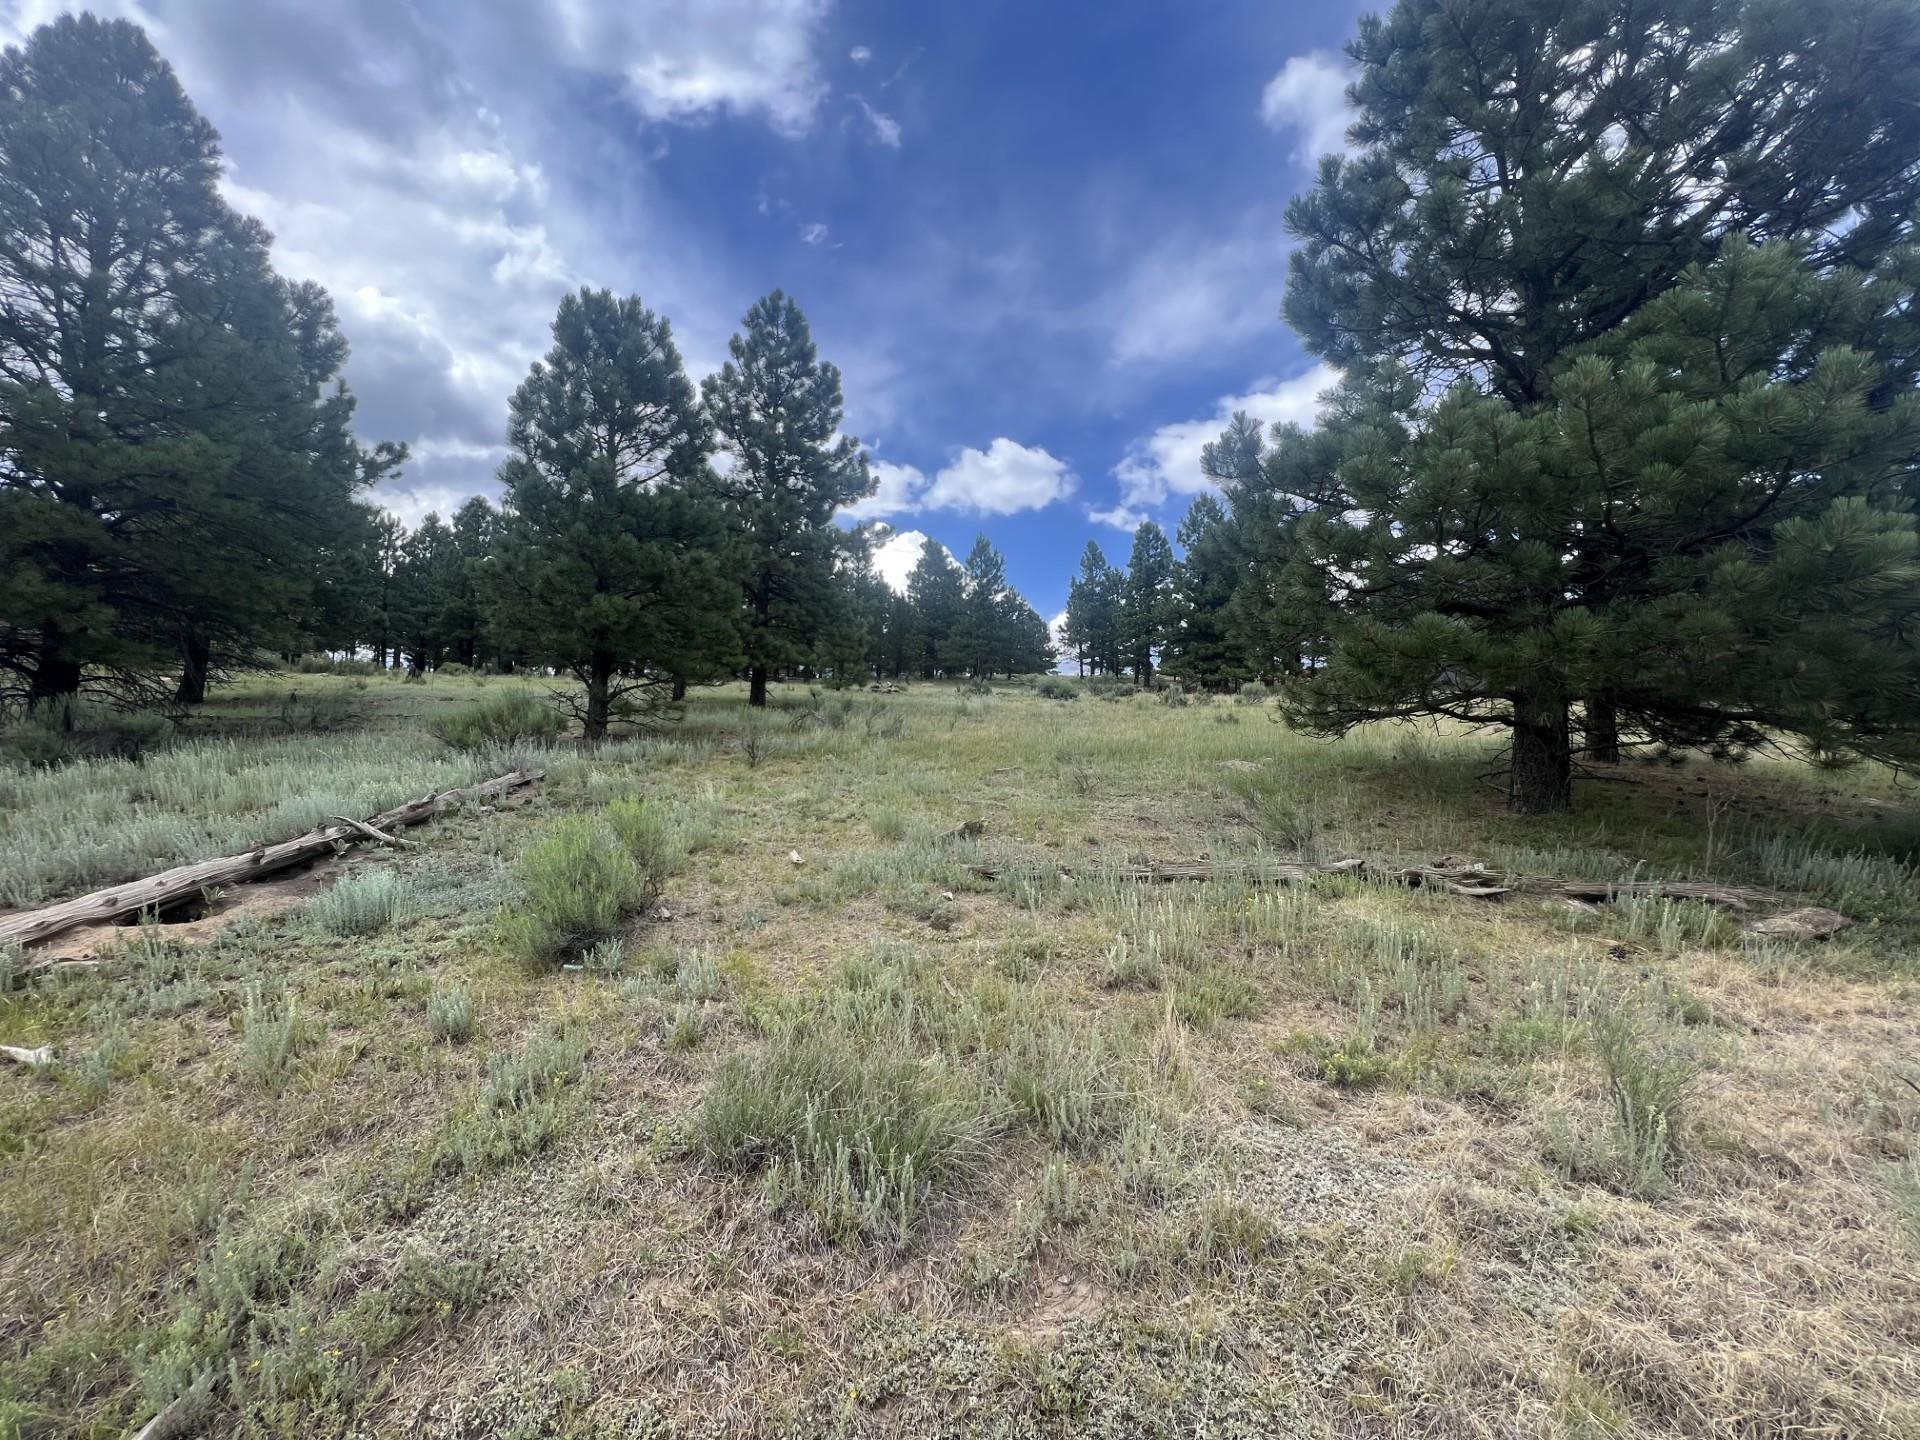 Beautiful lot with great mountain views right next to the PGA rated golf course and just minutes from the Angel Fire Resort ski-mountain, and other resort amenities including hiking trails, trout-stocked lake, country club, gym, tennis/pickleball courts and a nationally recognized mountain bike terrain park. Surrounded by other luxurious homes this is the perfect lot to build your dream home.